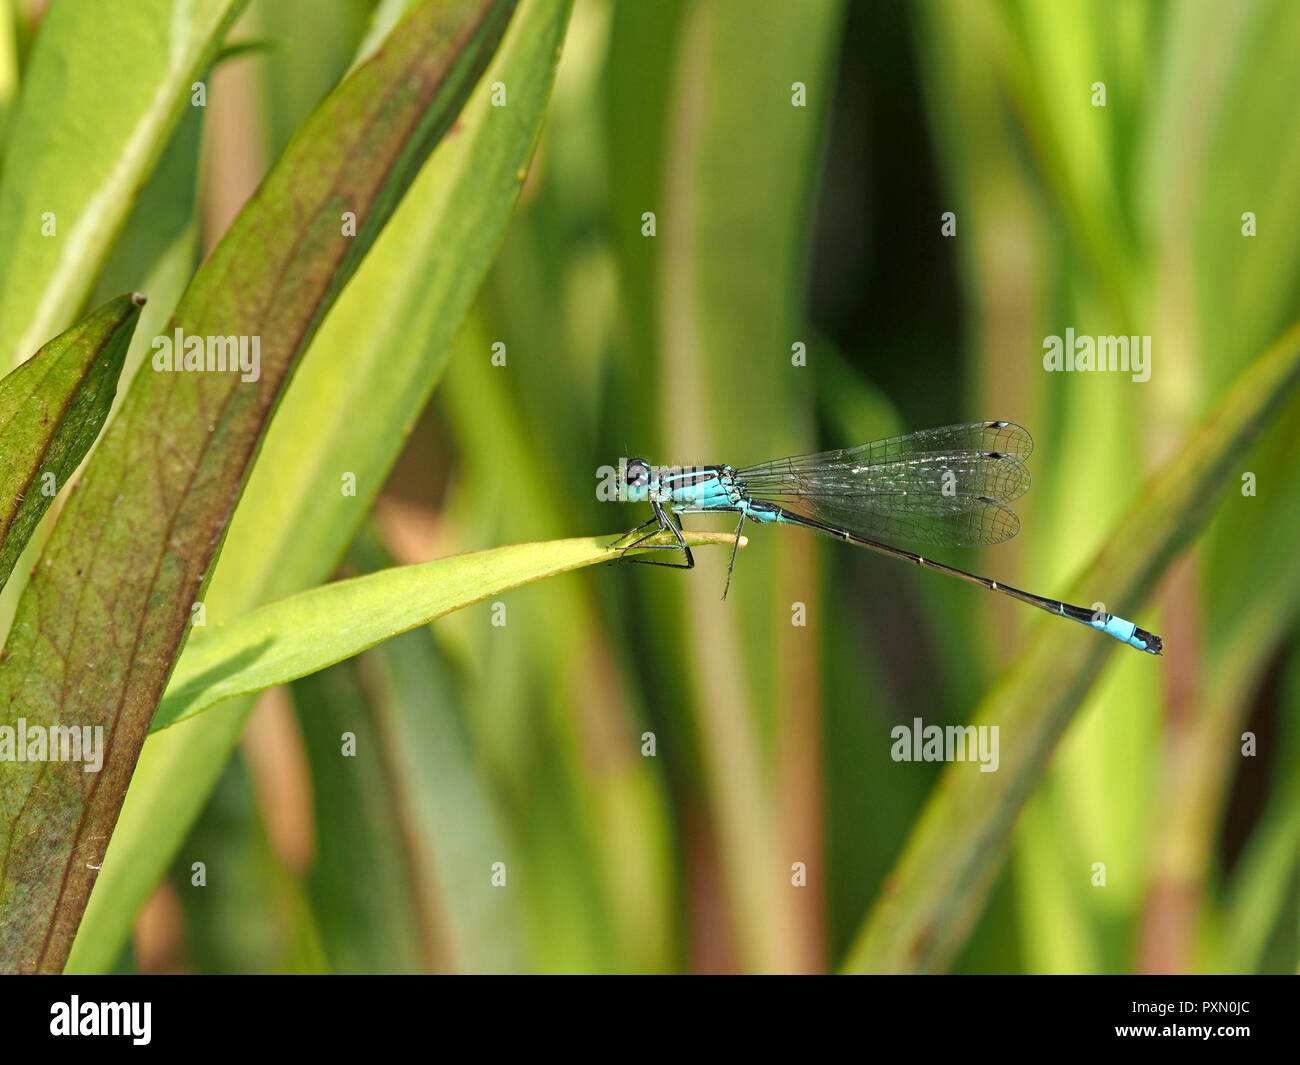 common bluetail or Blue tailed damselfly (Ischnura elegans) perched on leaf of water plant in London, England, UK Stock Photo